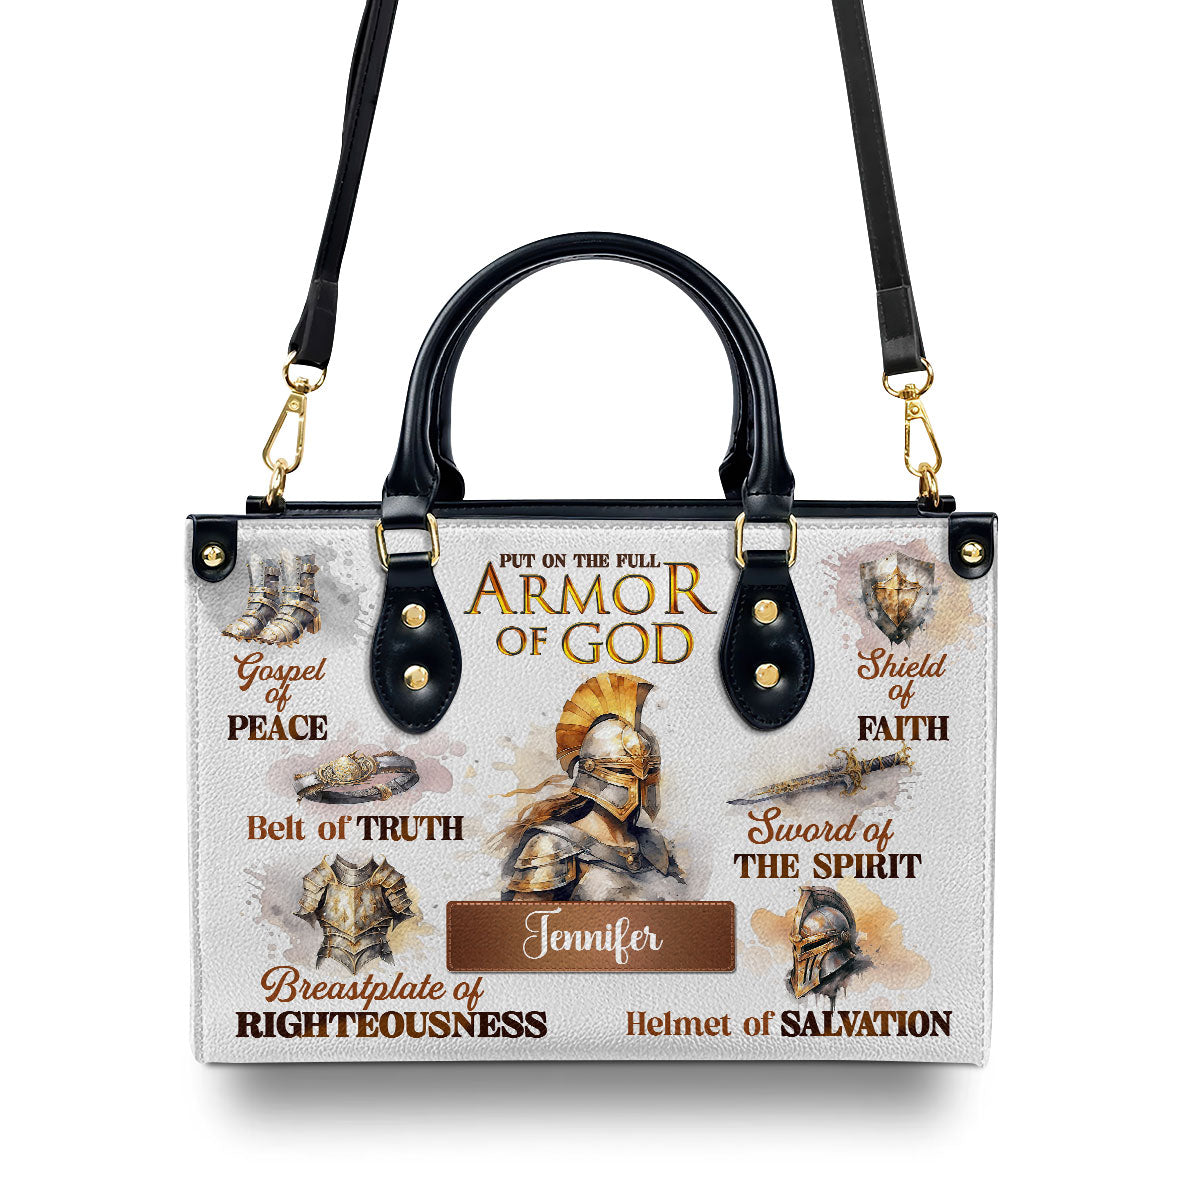 Armor Of God Personalized Leather Handbag With Handle For Women